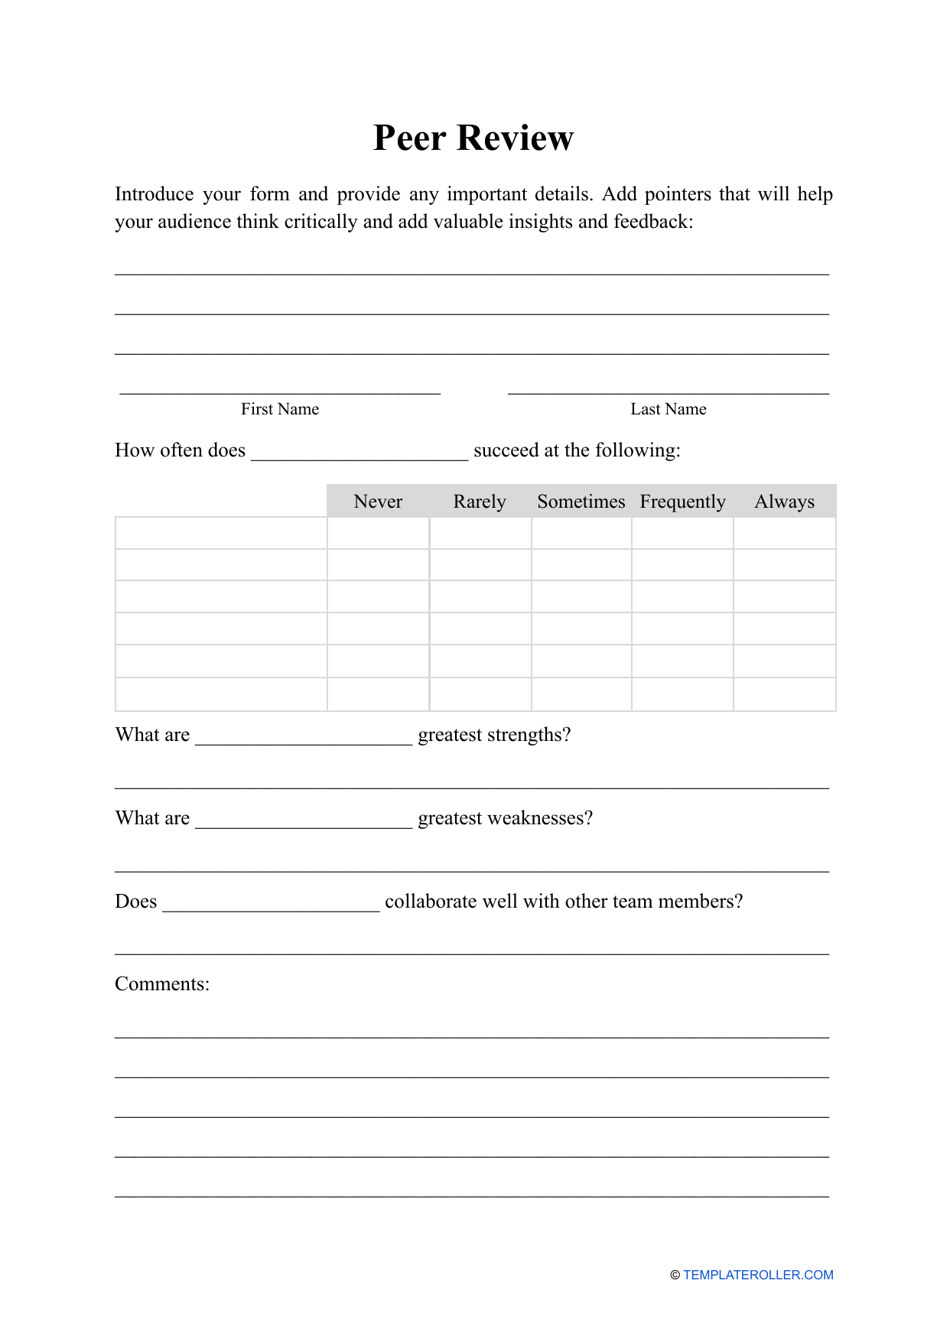 Peer Review Template, Page 1